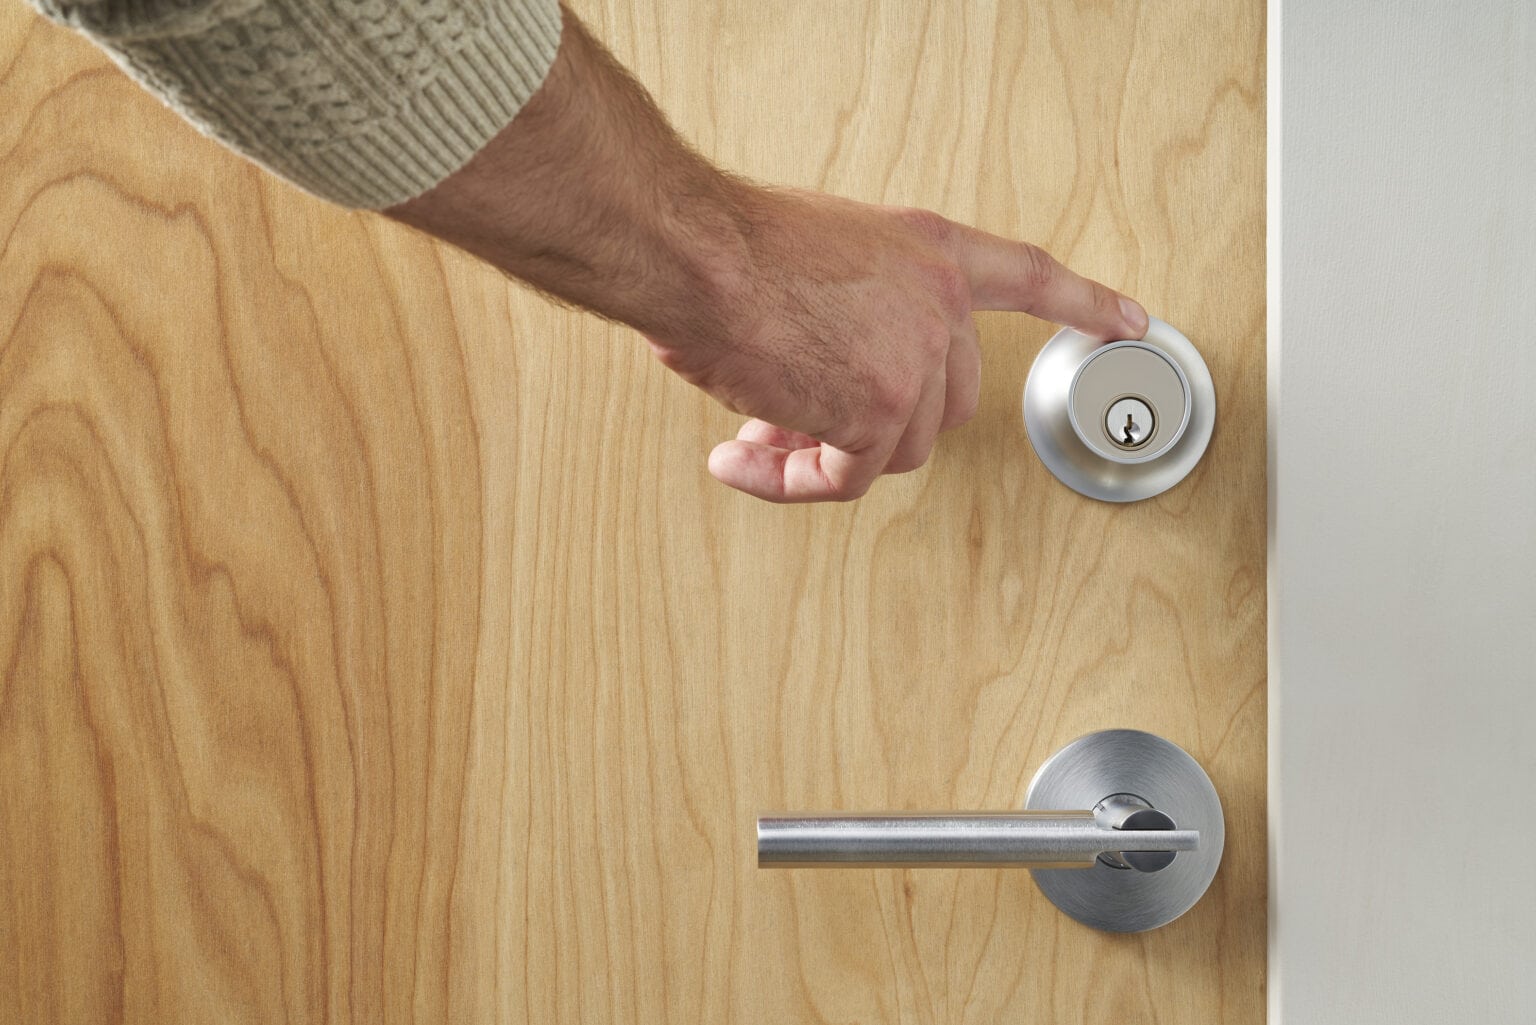 The new Level Touch smart lock opens with a touch -- and other ways, too.